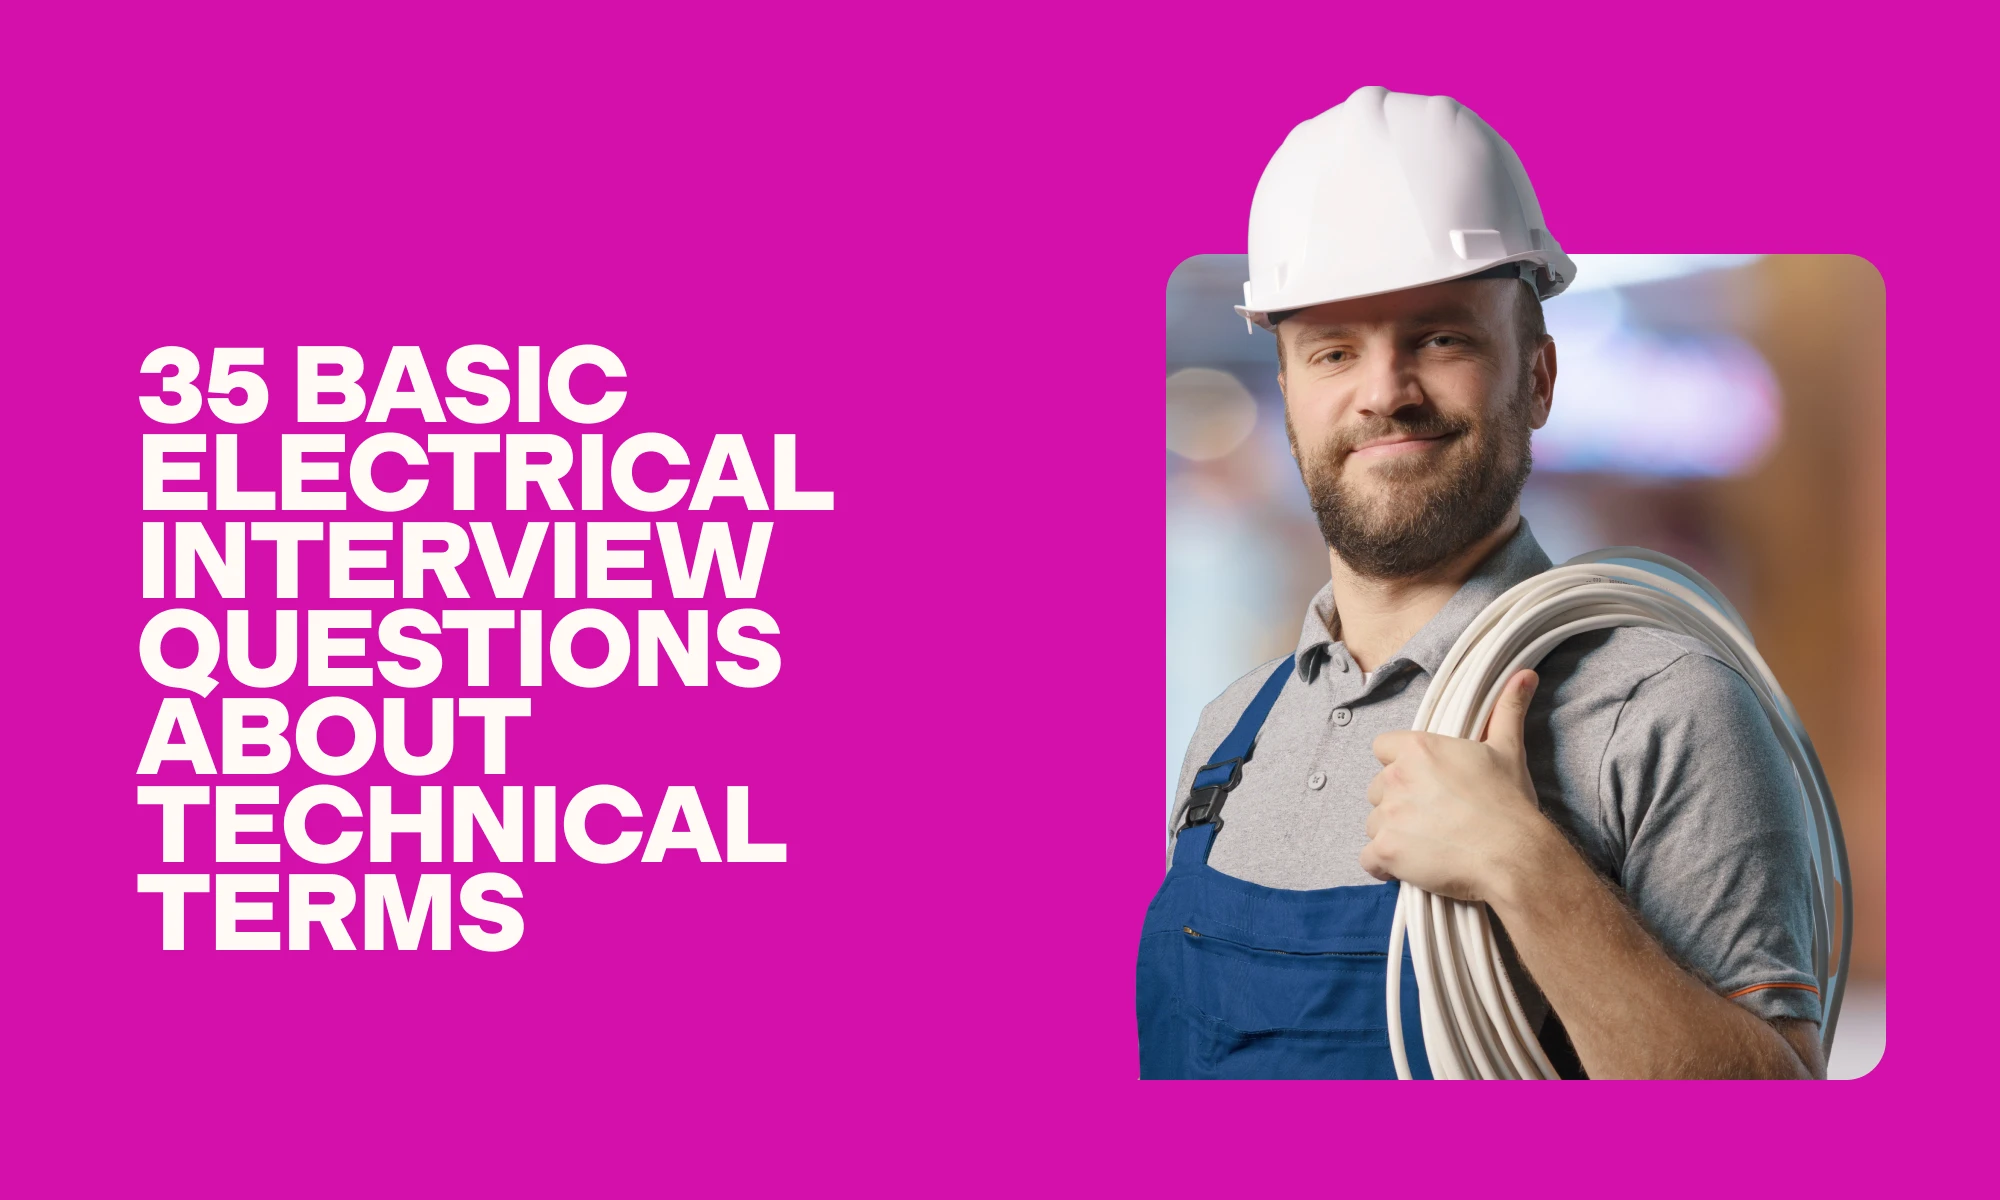 35 basic electrical interview questions about technical terms to ask your interviewees